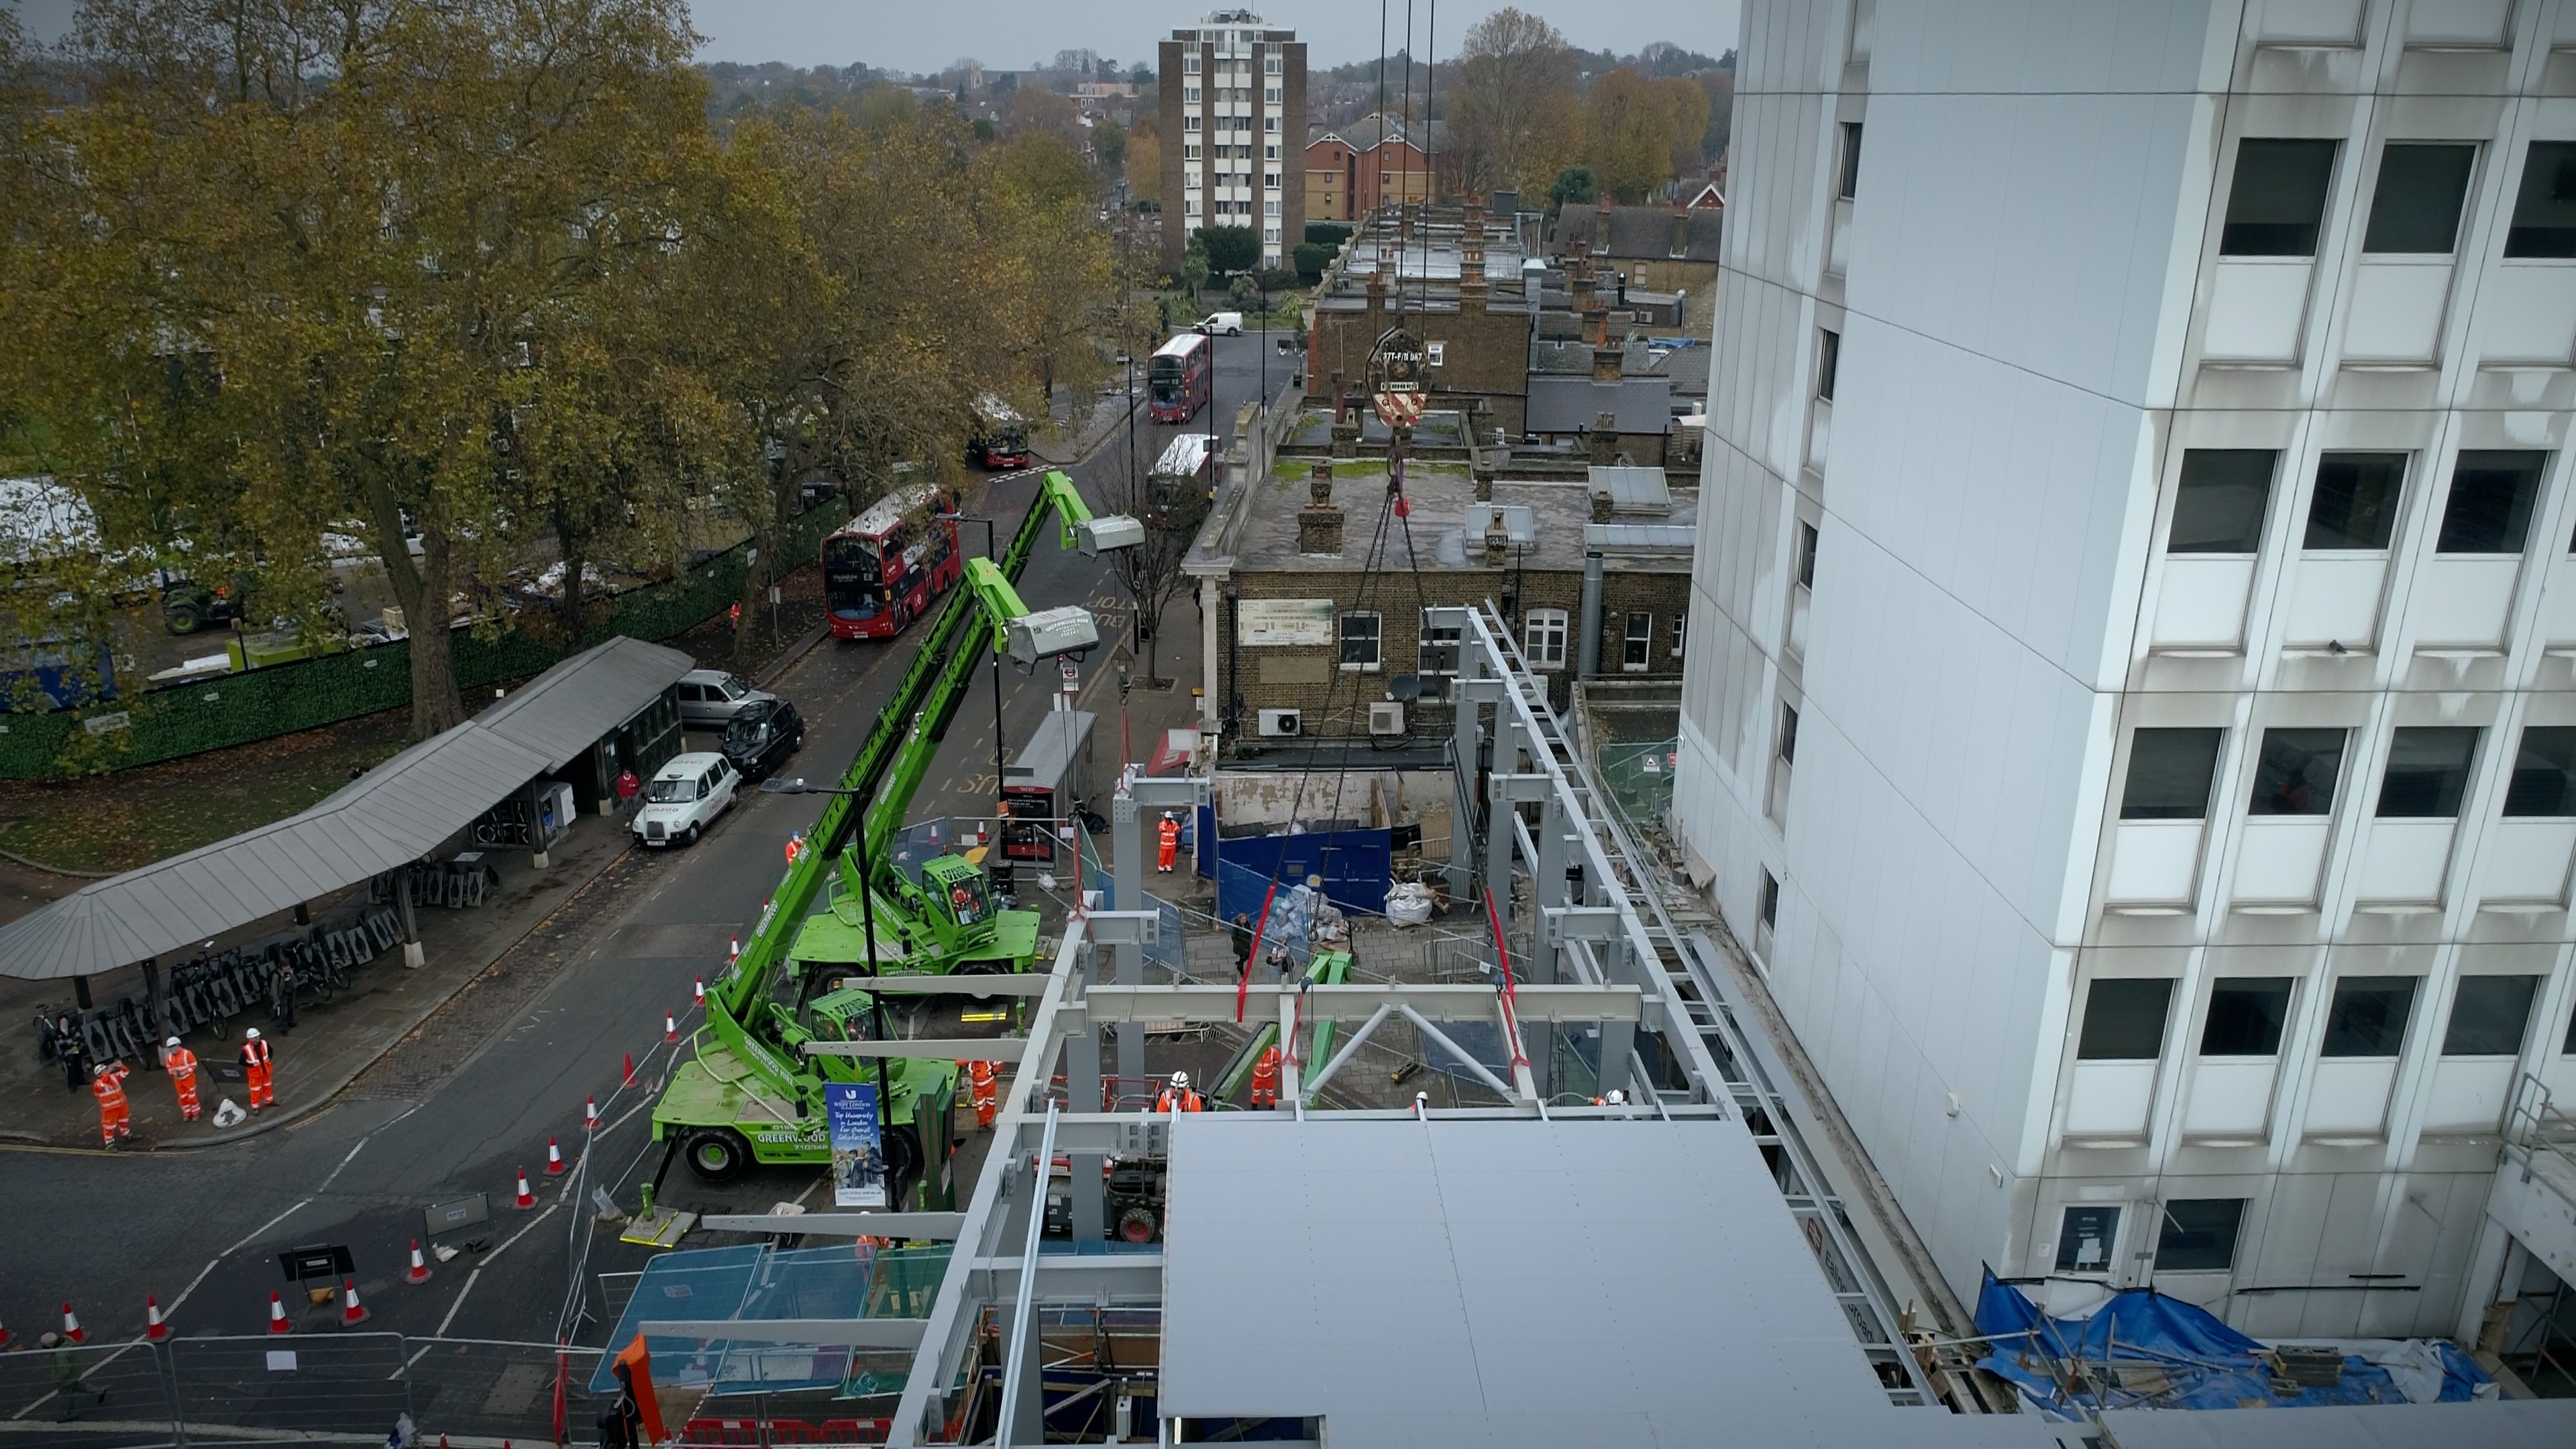 Milestone reached at Ealing Broadway Phase One image